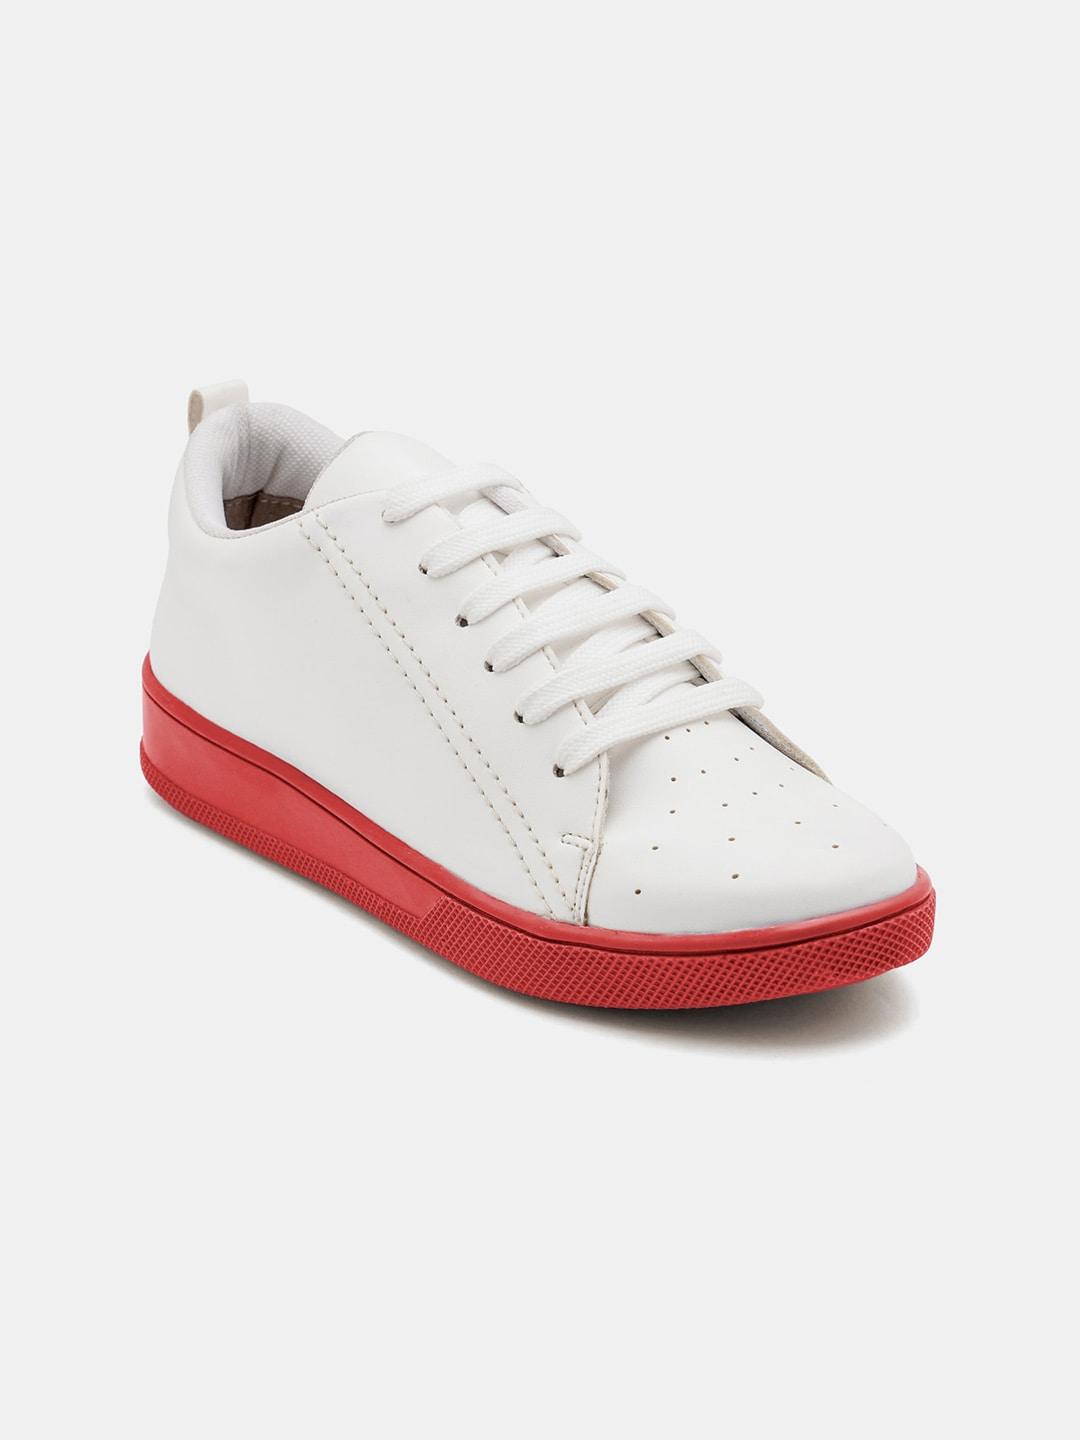 r&b women perforated contrast sole sneakers